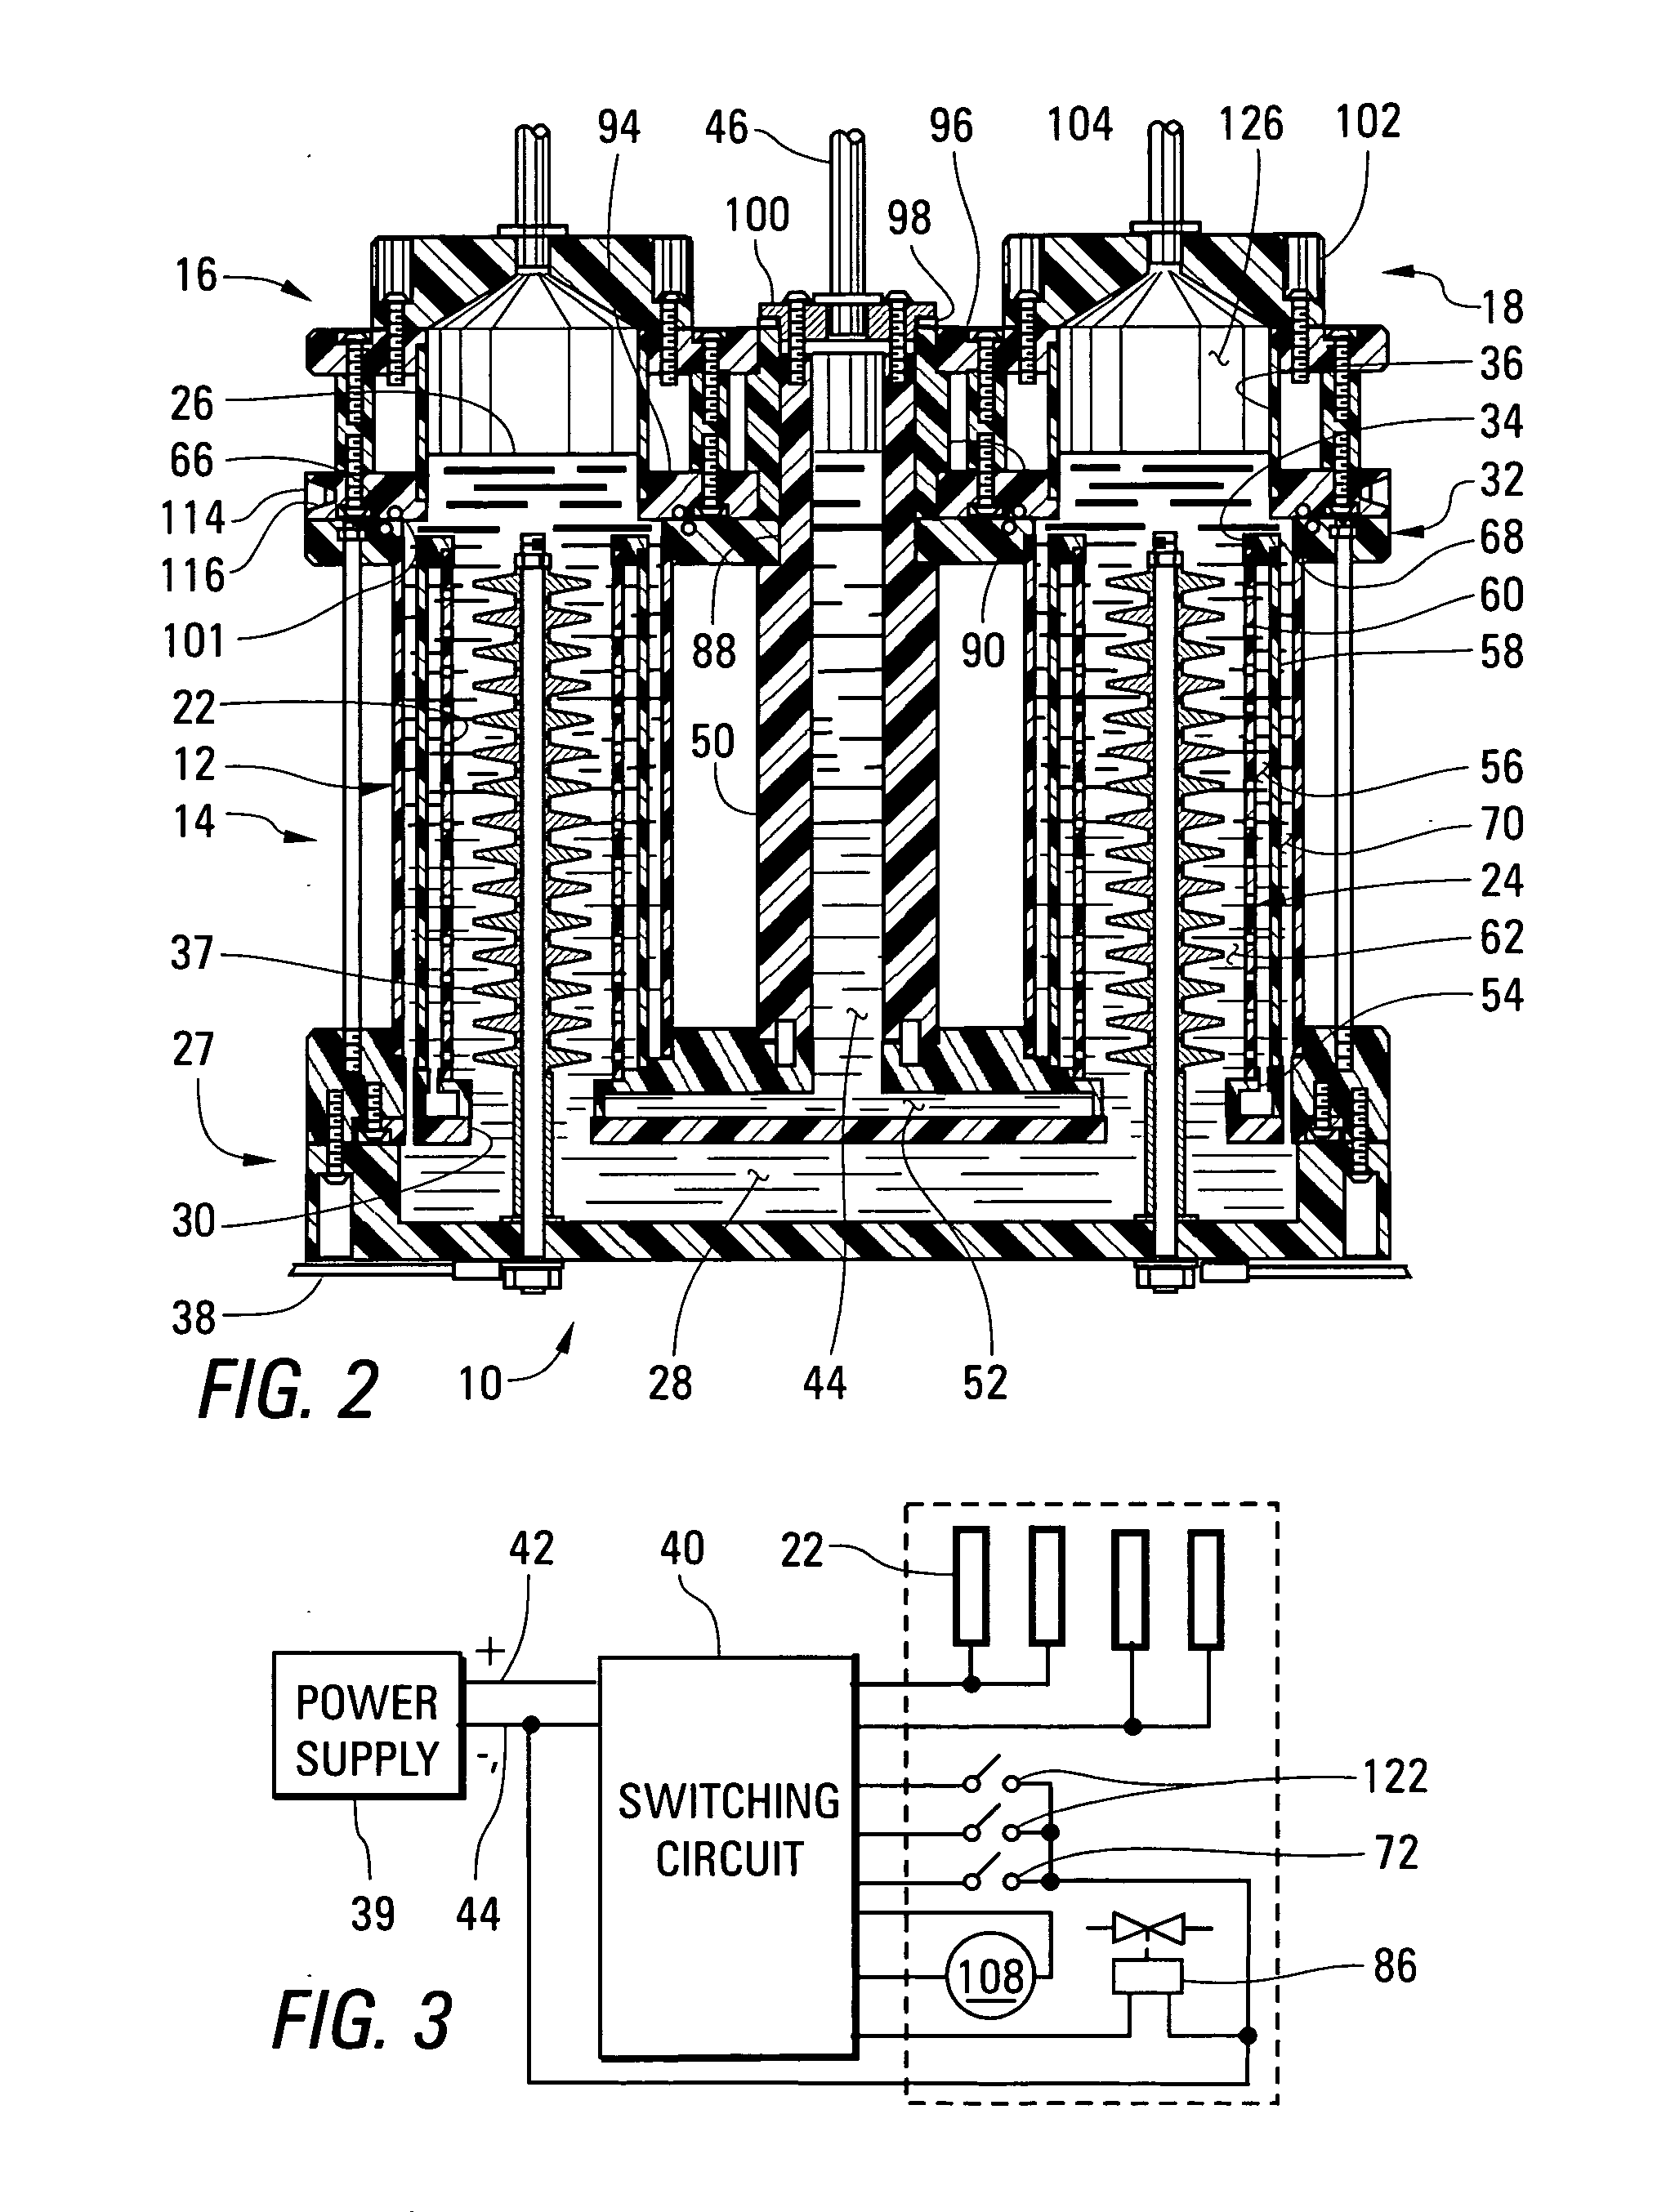 Hydrogen and oxygen generator with polarity switching in electrolytic cells